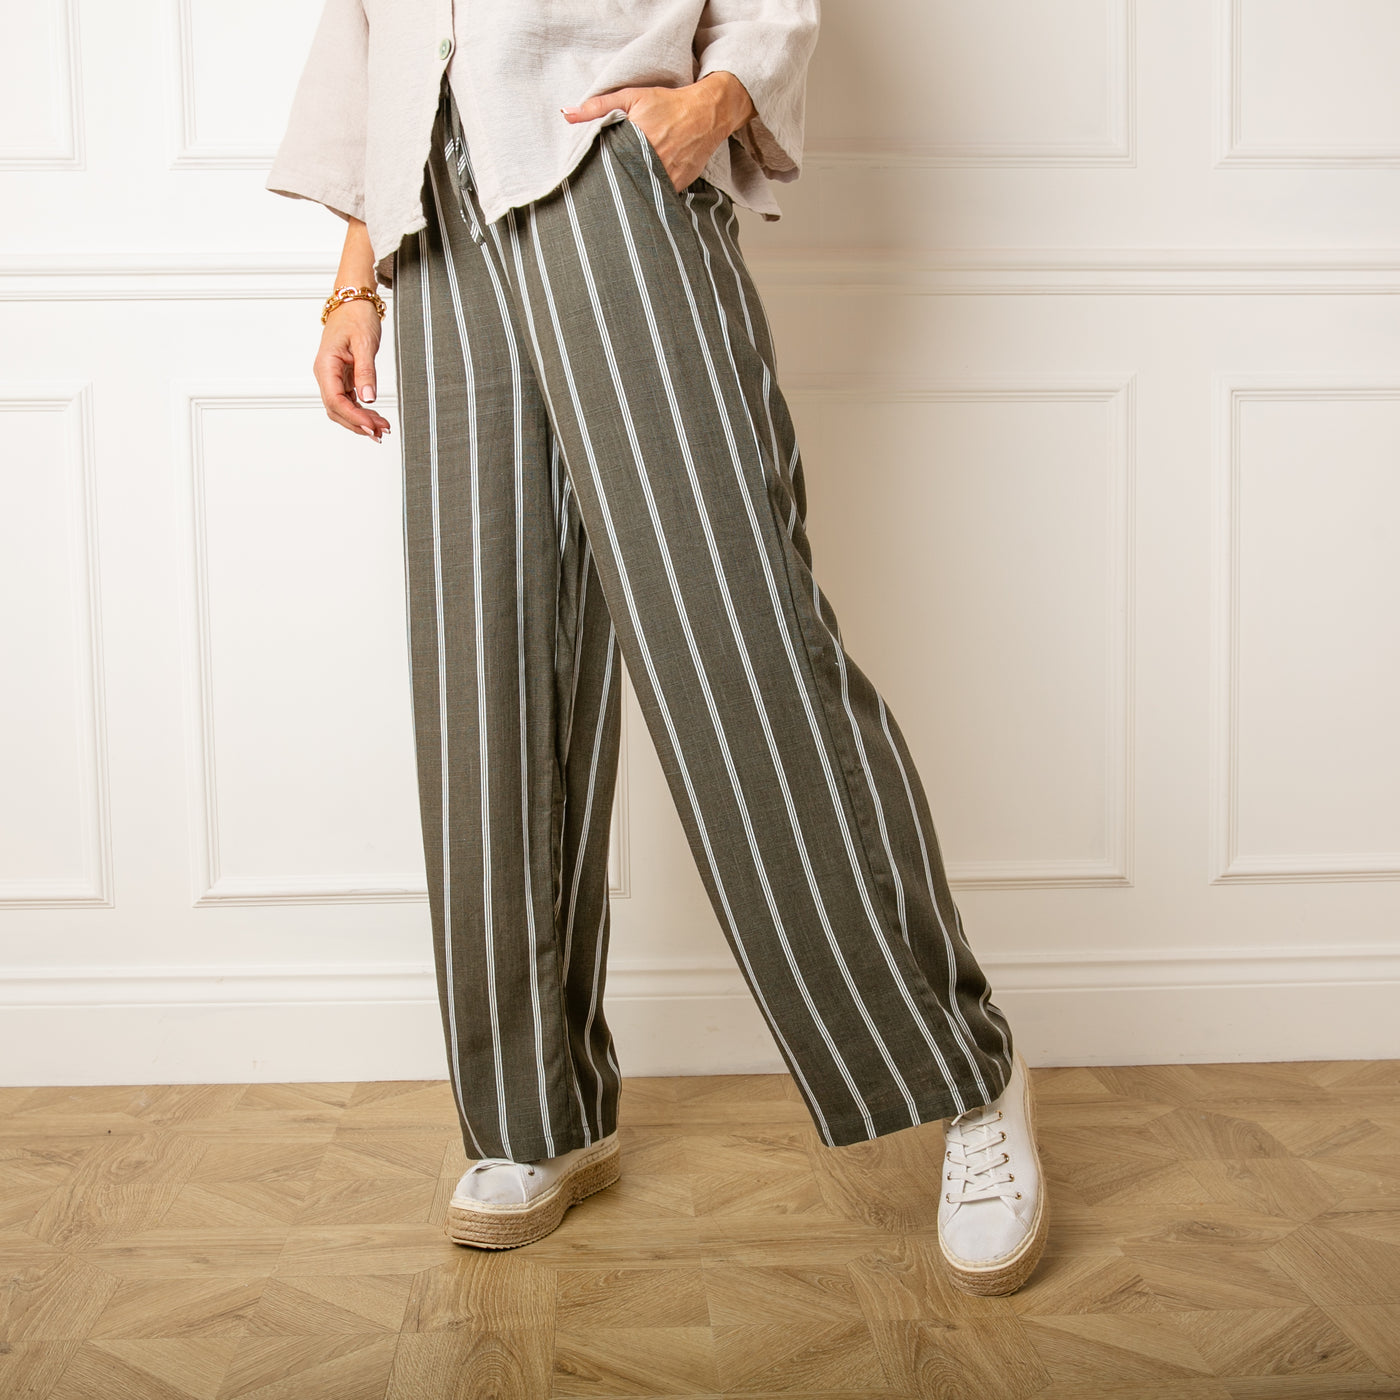 The khaki green Pinstripe Linen Trousers with side pockets and a wide leg silhouette 